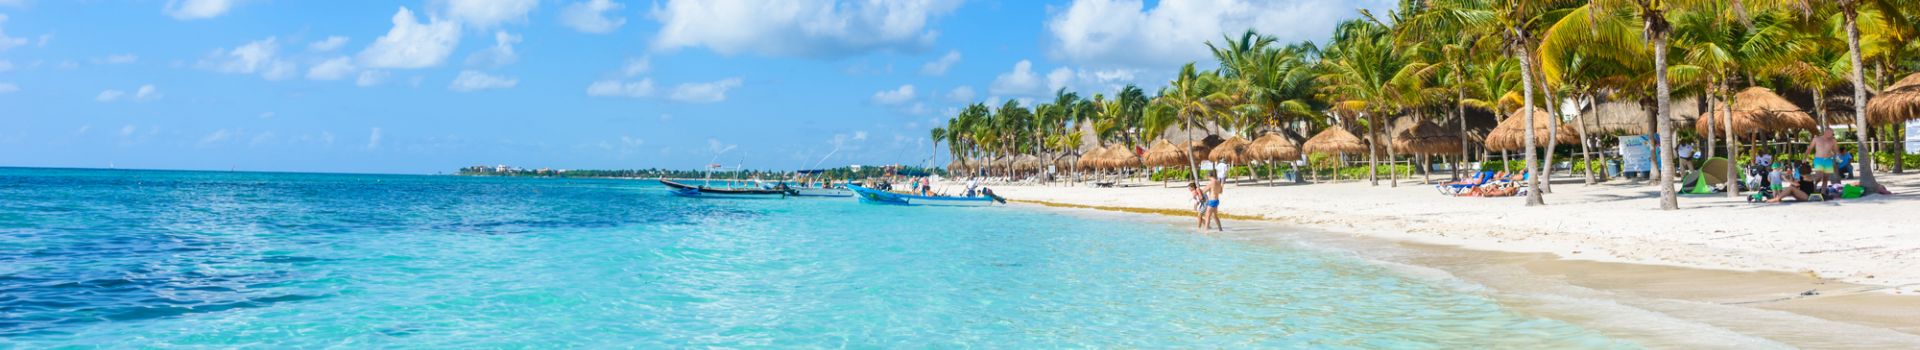 Family Holidays to Cancun with Cassidy Travel